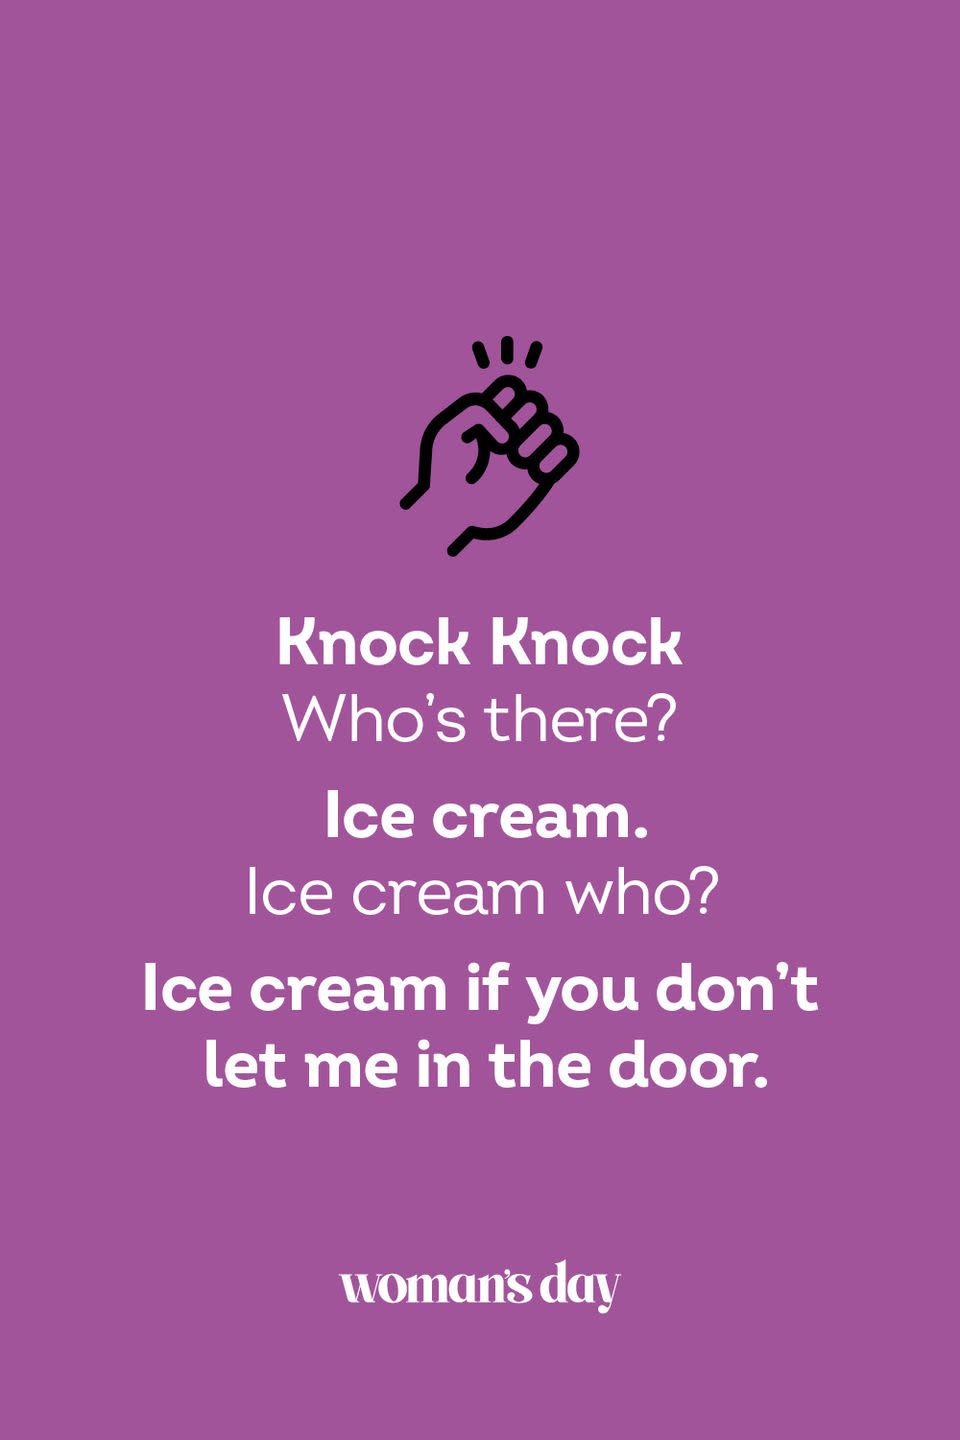 <p><strong>Knock Knock</strong></p><p><em>Who’s there? </em></p><p><strong>Ice cream.</strong></p><p><em>Ice cream who?</em></p><p><strong>Ice cream if you don’t let me in the door.</strong></p>